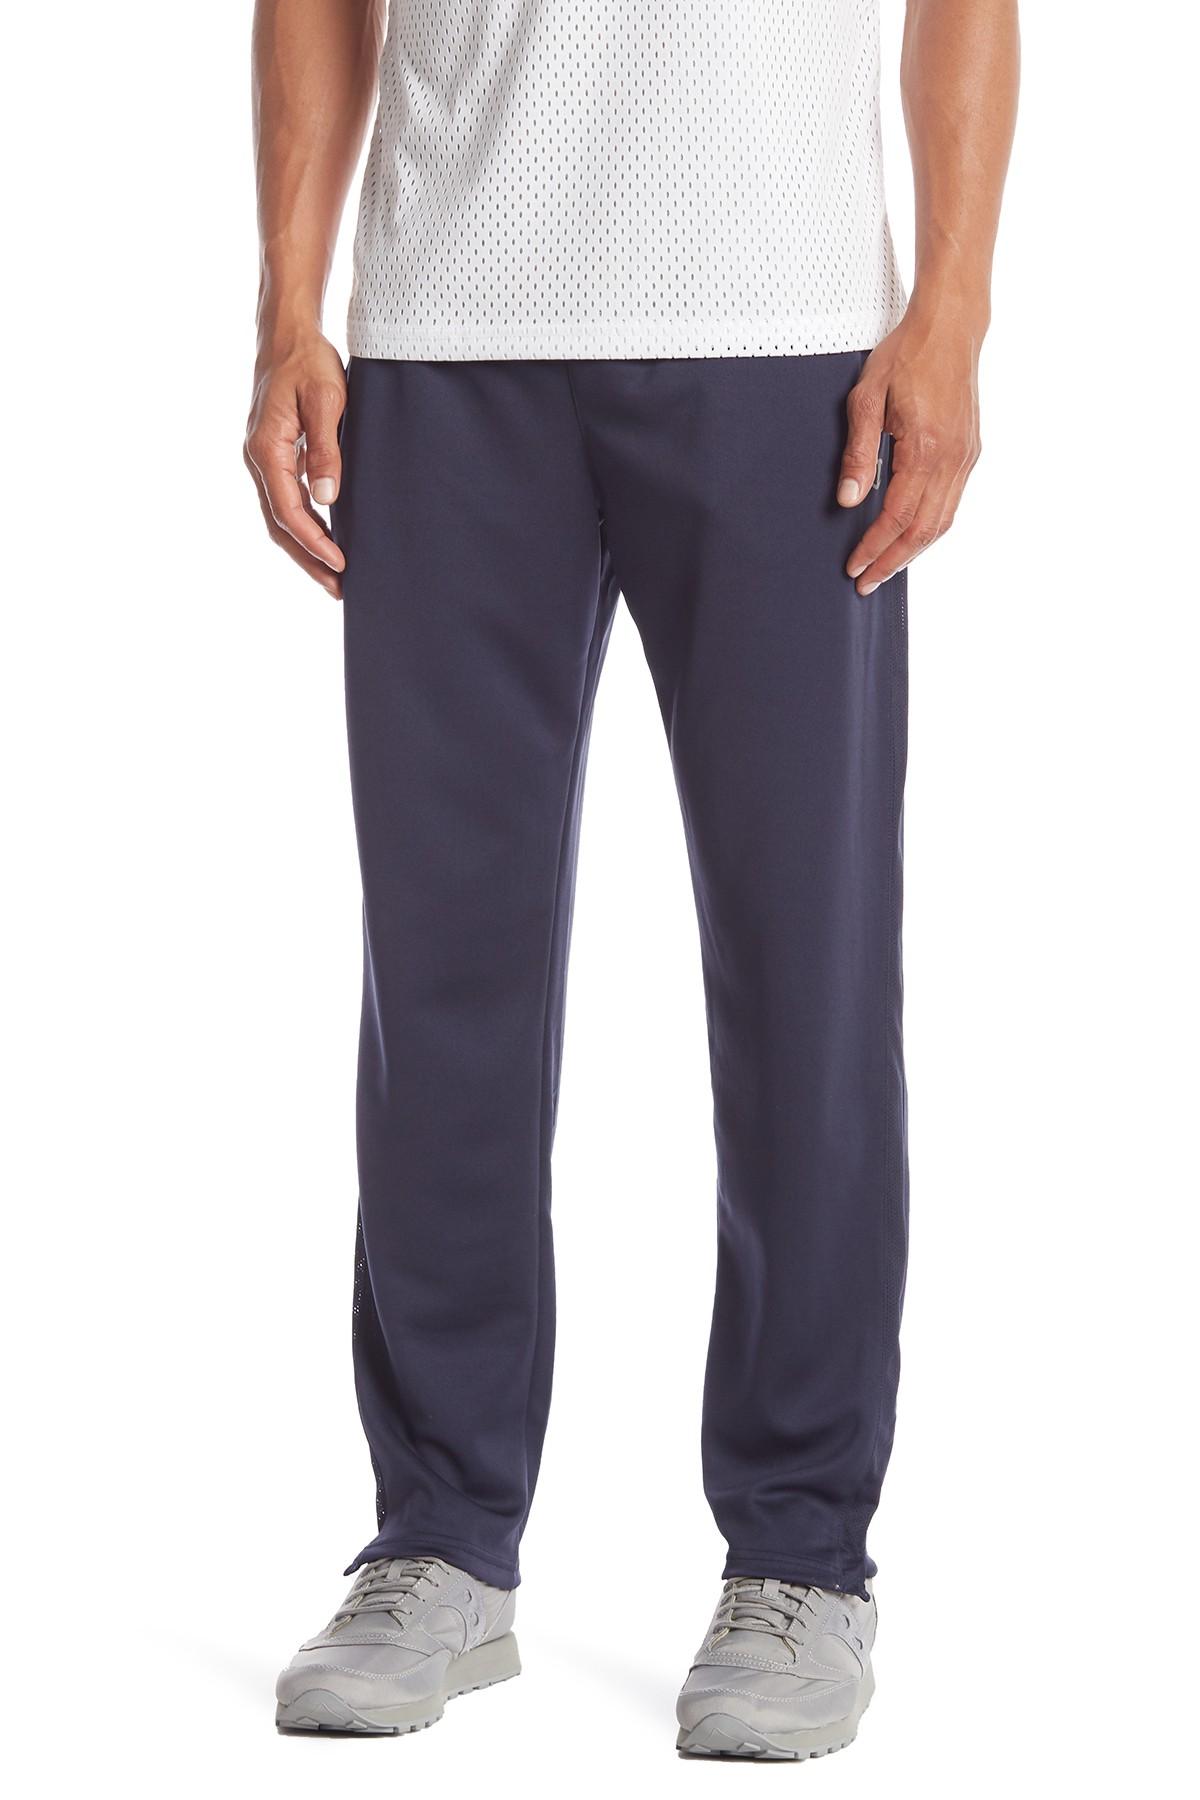 Champion Double Dry Select Training Pants in Blue for Men - Lyst